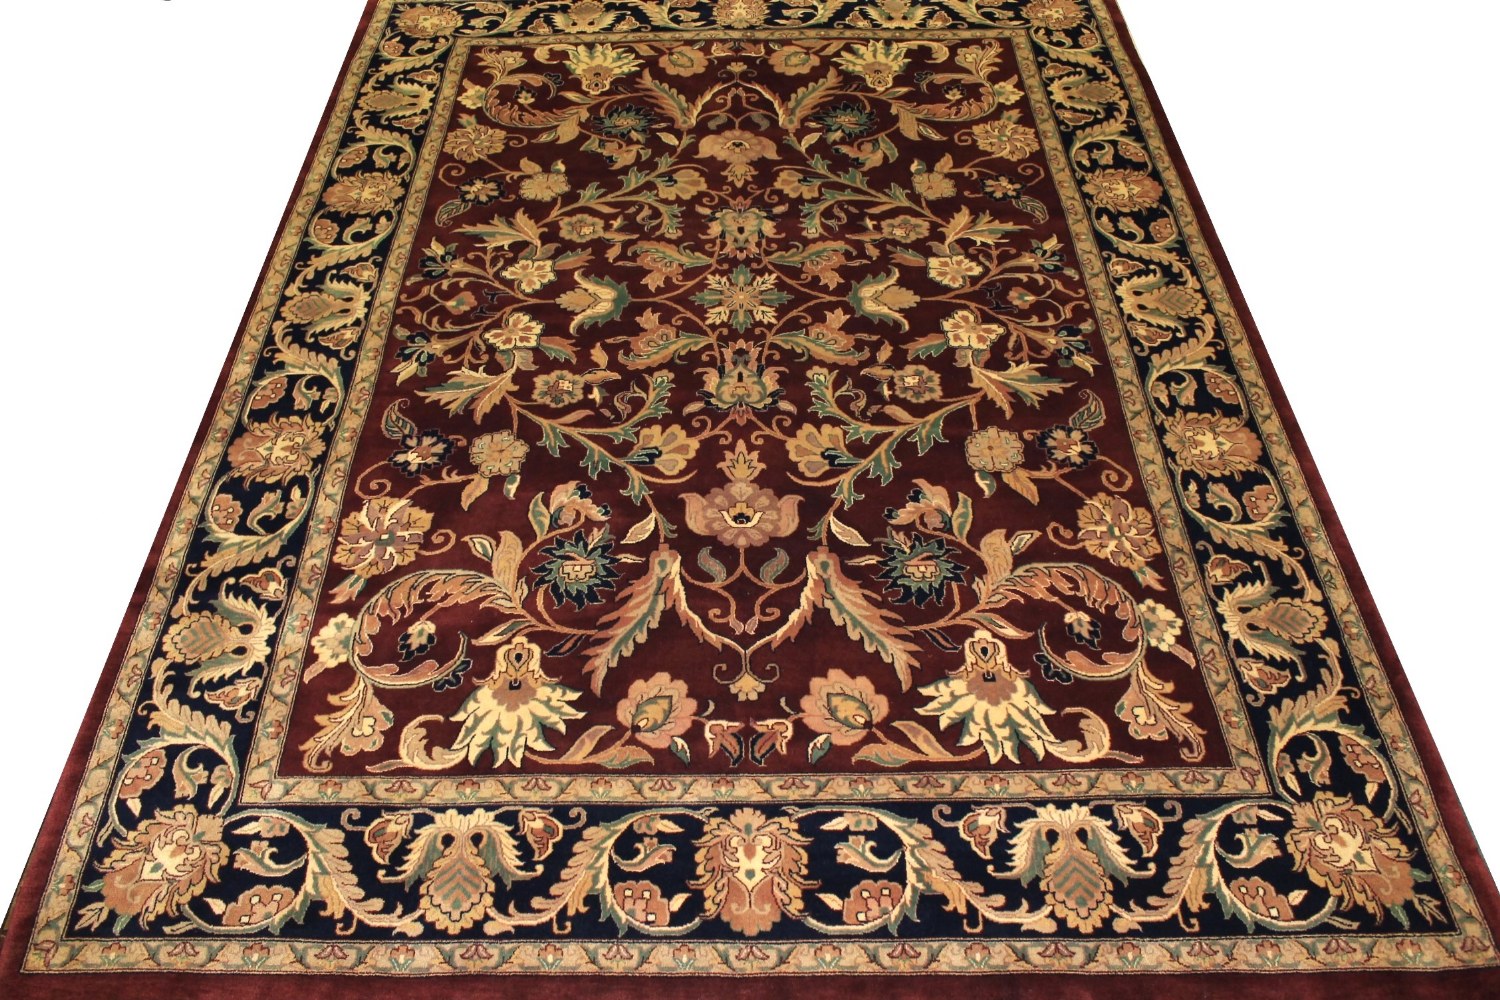 9x12 Jaipur Hand Knotted Wool Area Rug - MR0110